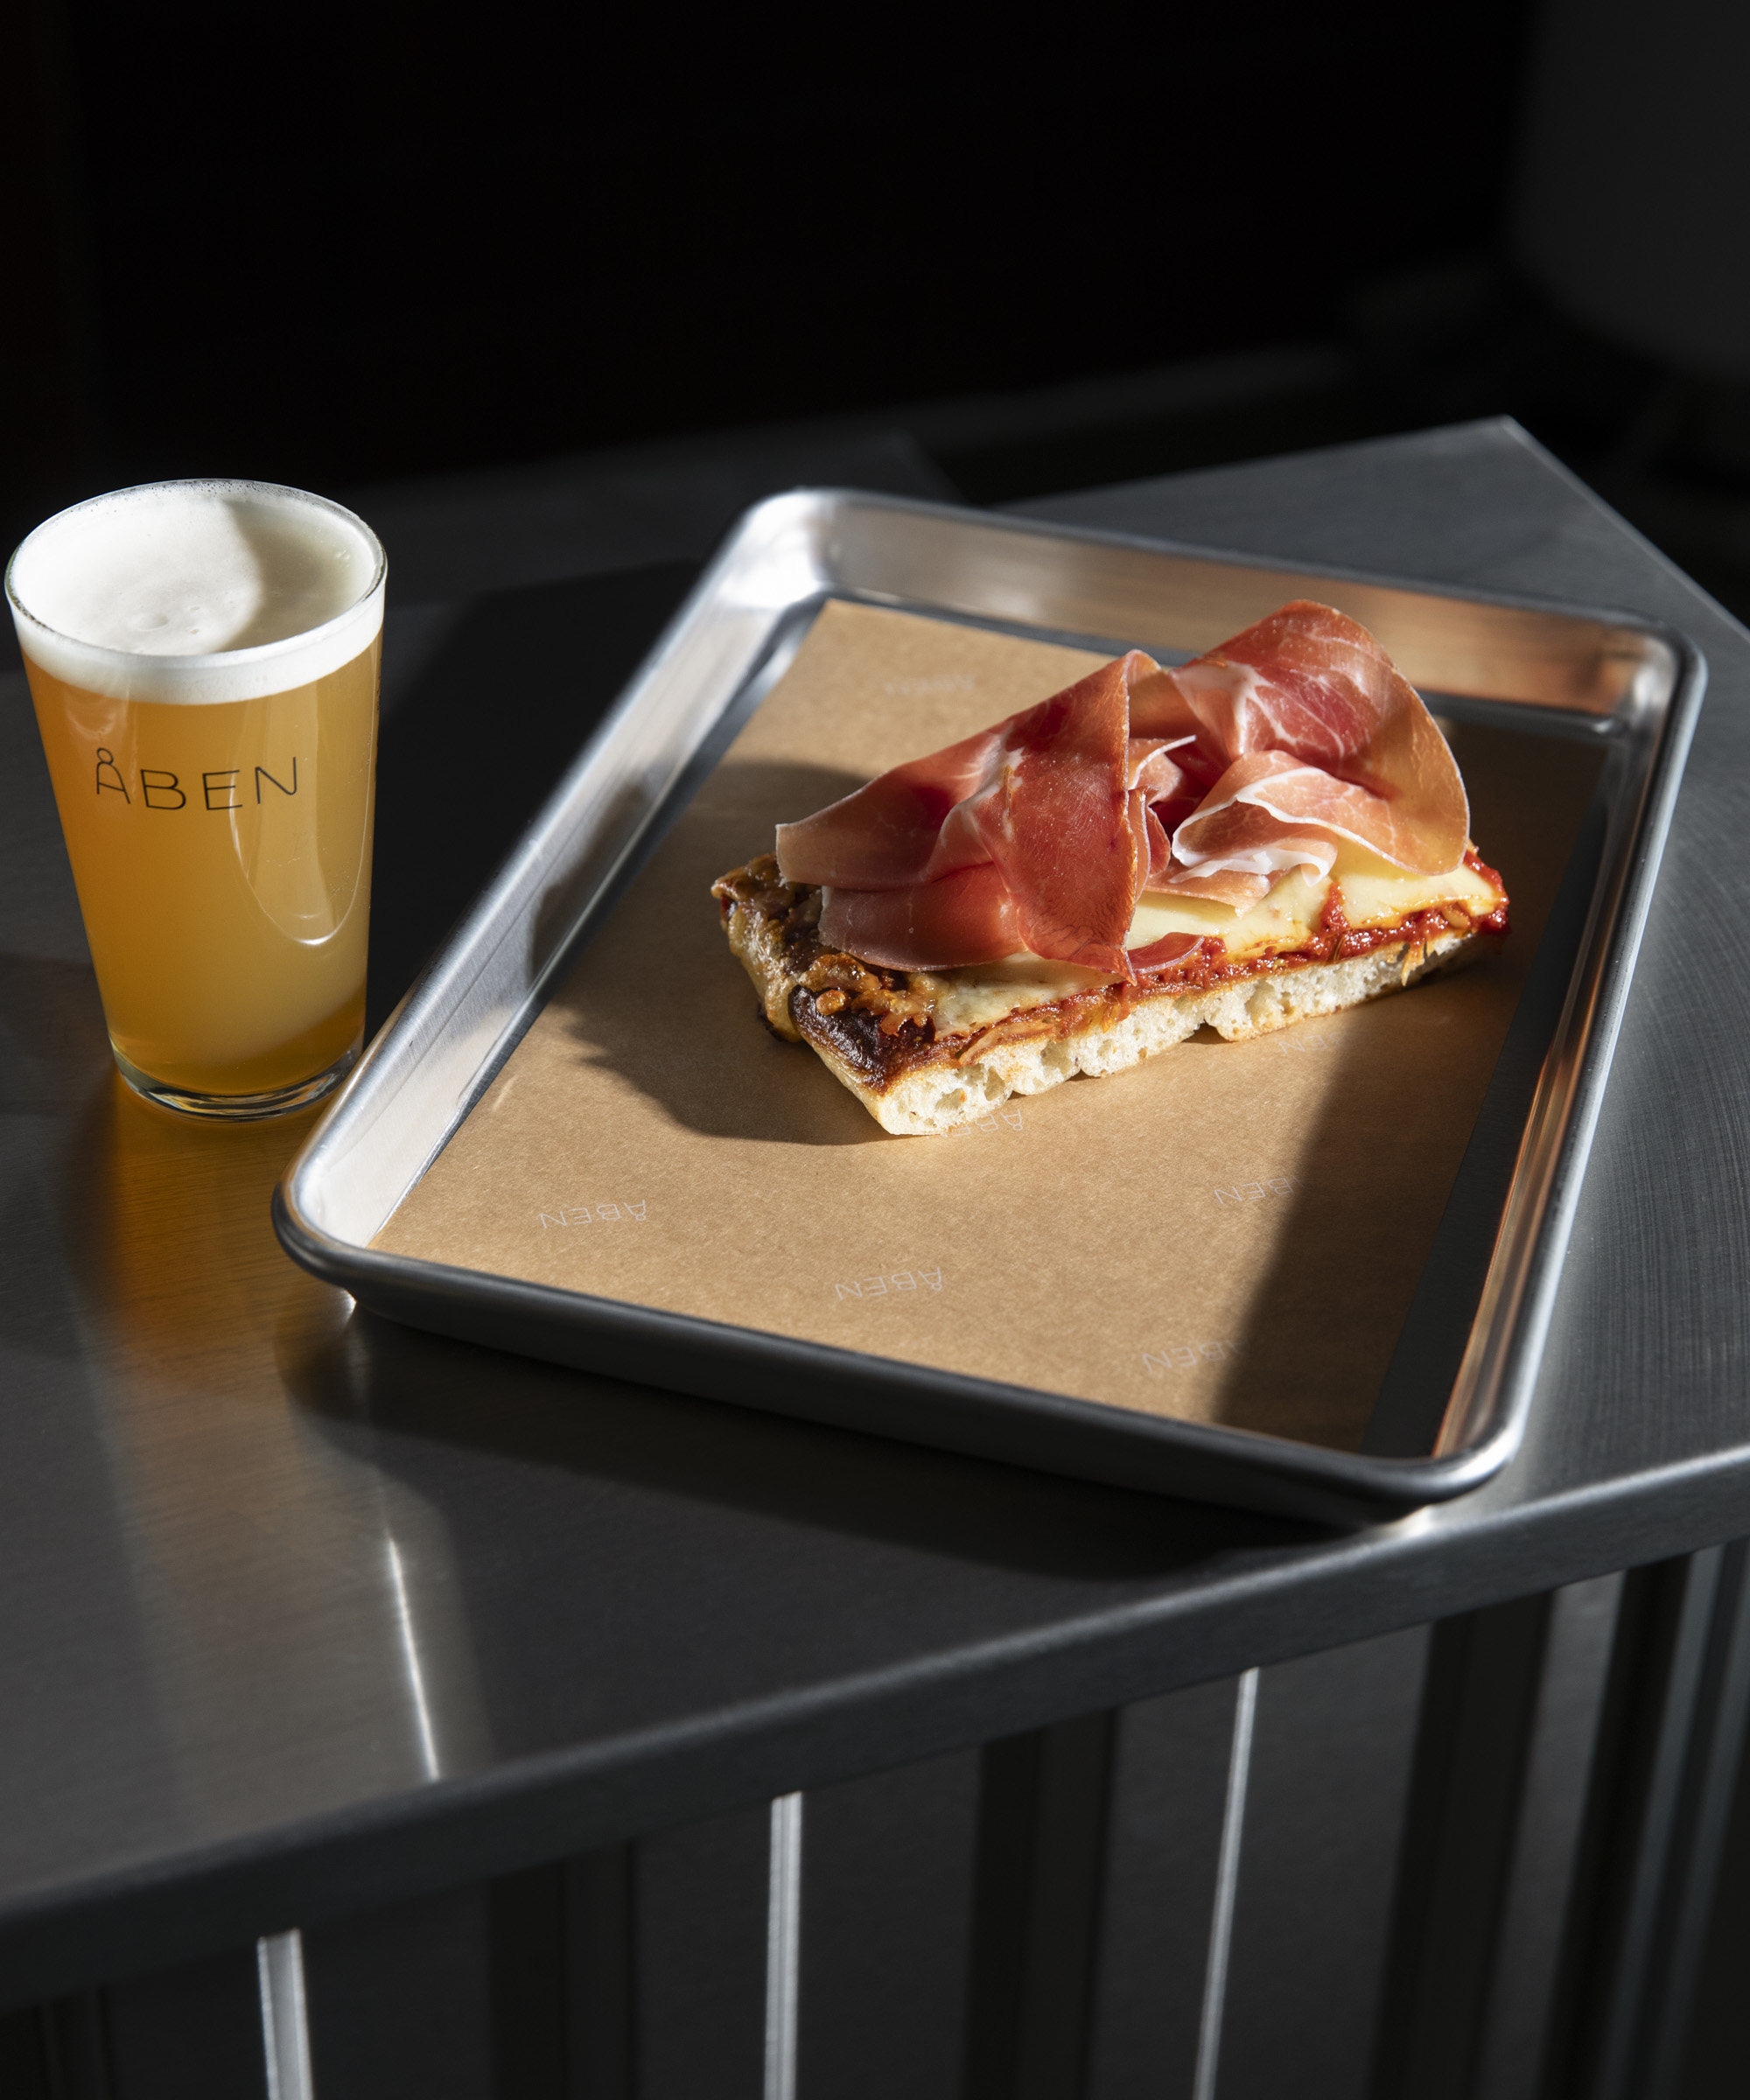 Pick any draft beer + pizza slice at ÅBEN in Copenhagen Airport – Live it up landside with awesome brews and American-style deep pan pizza